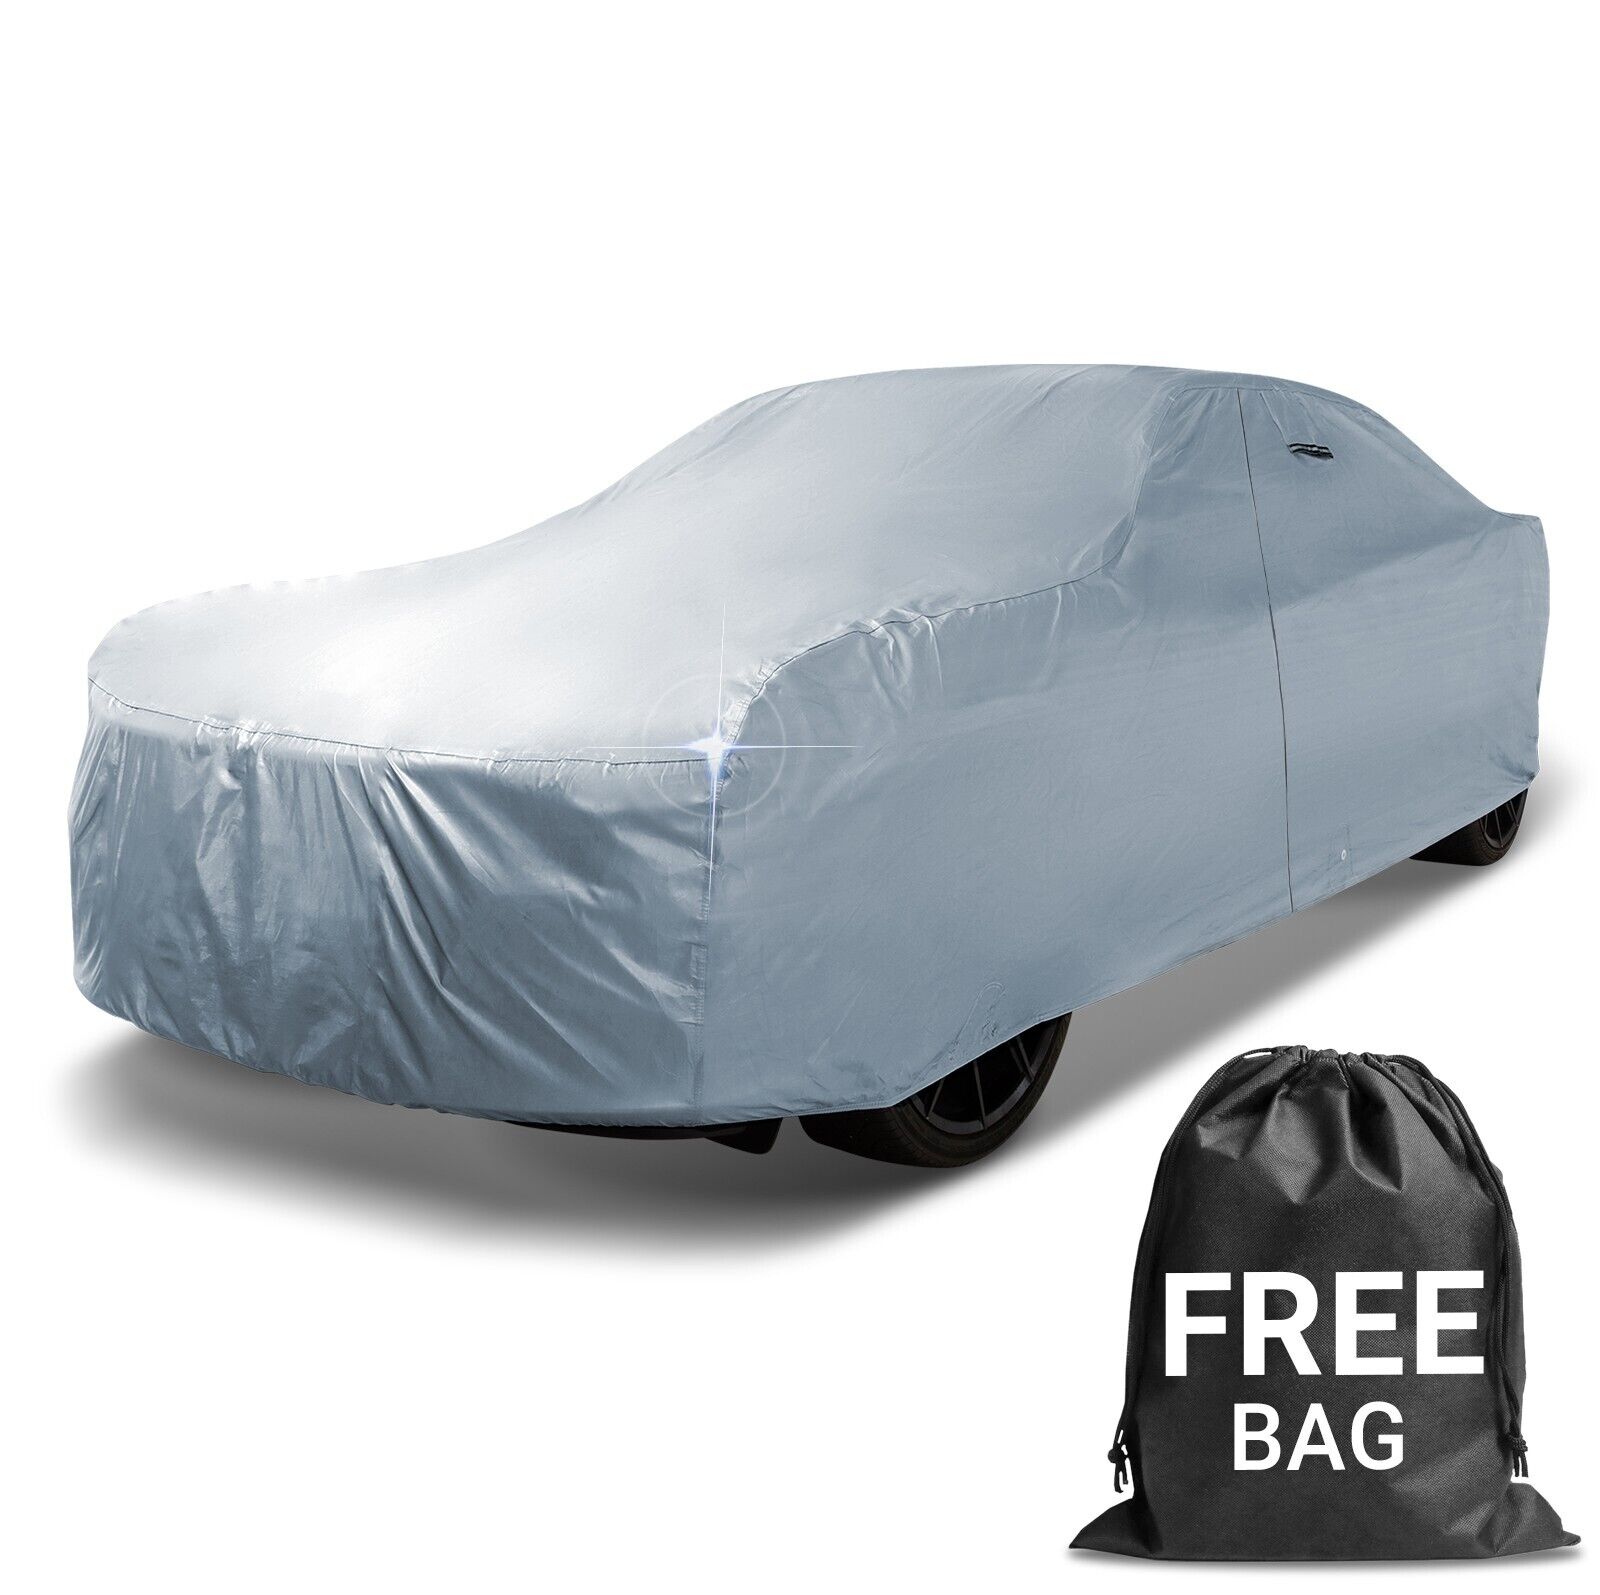 1968-1971 Ford Torino Custom Car Cover - Waterproof Outdoor Protection